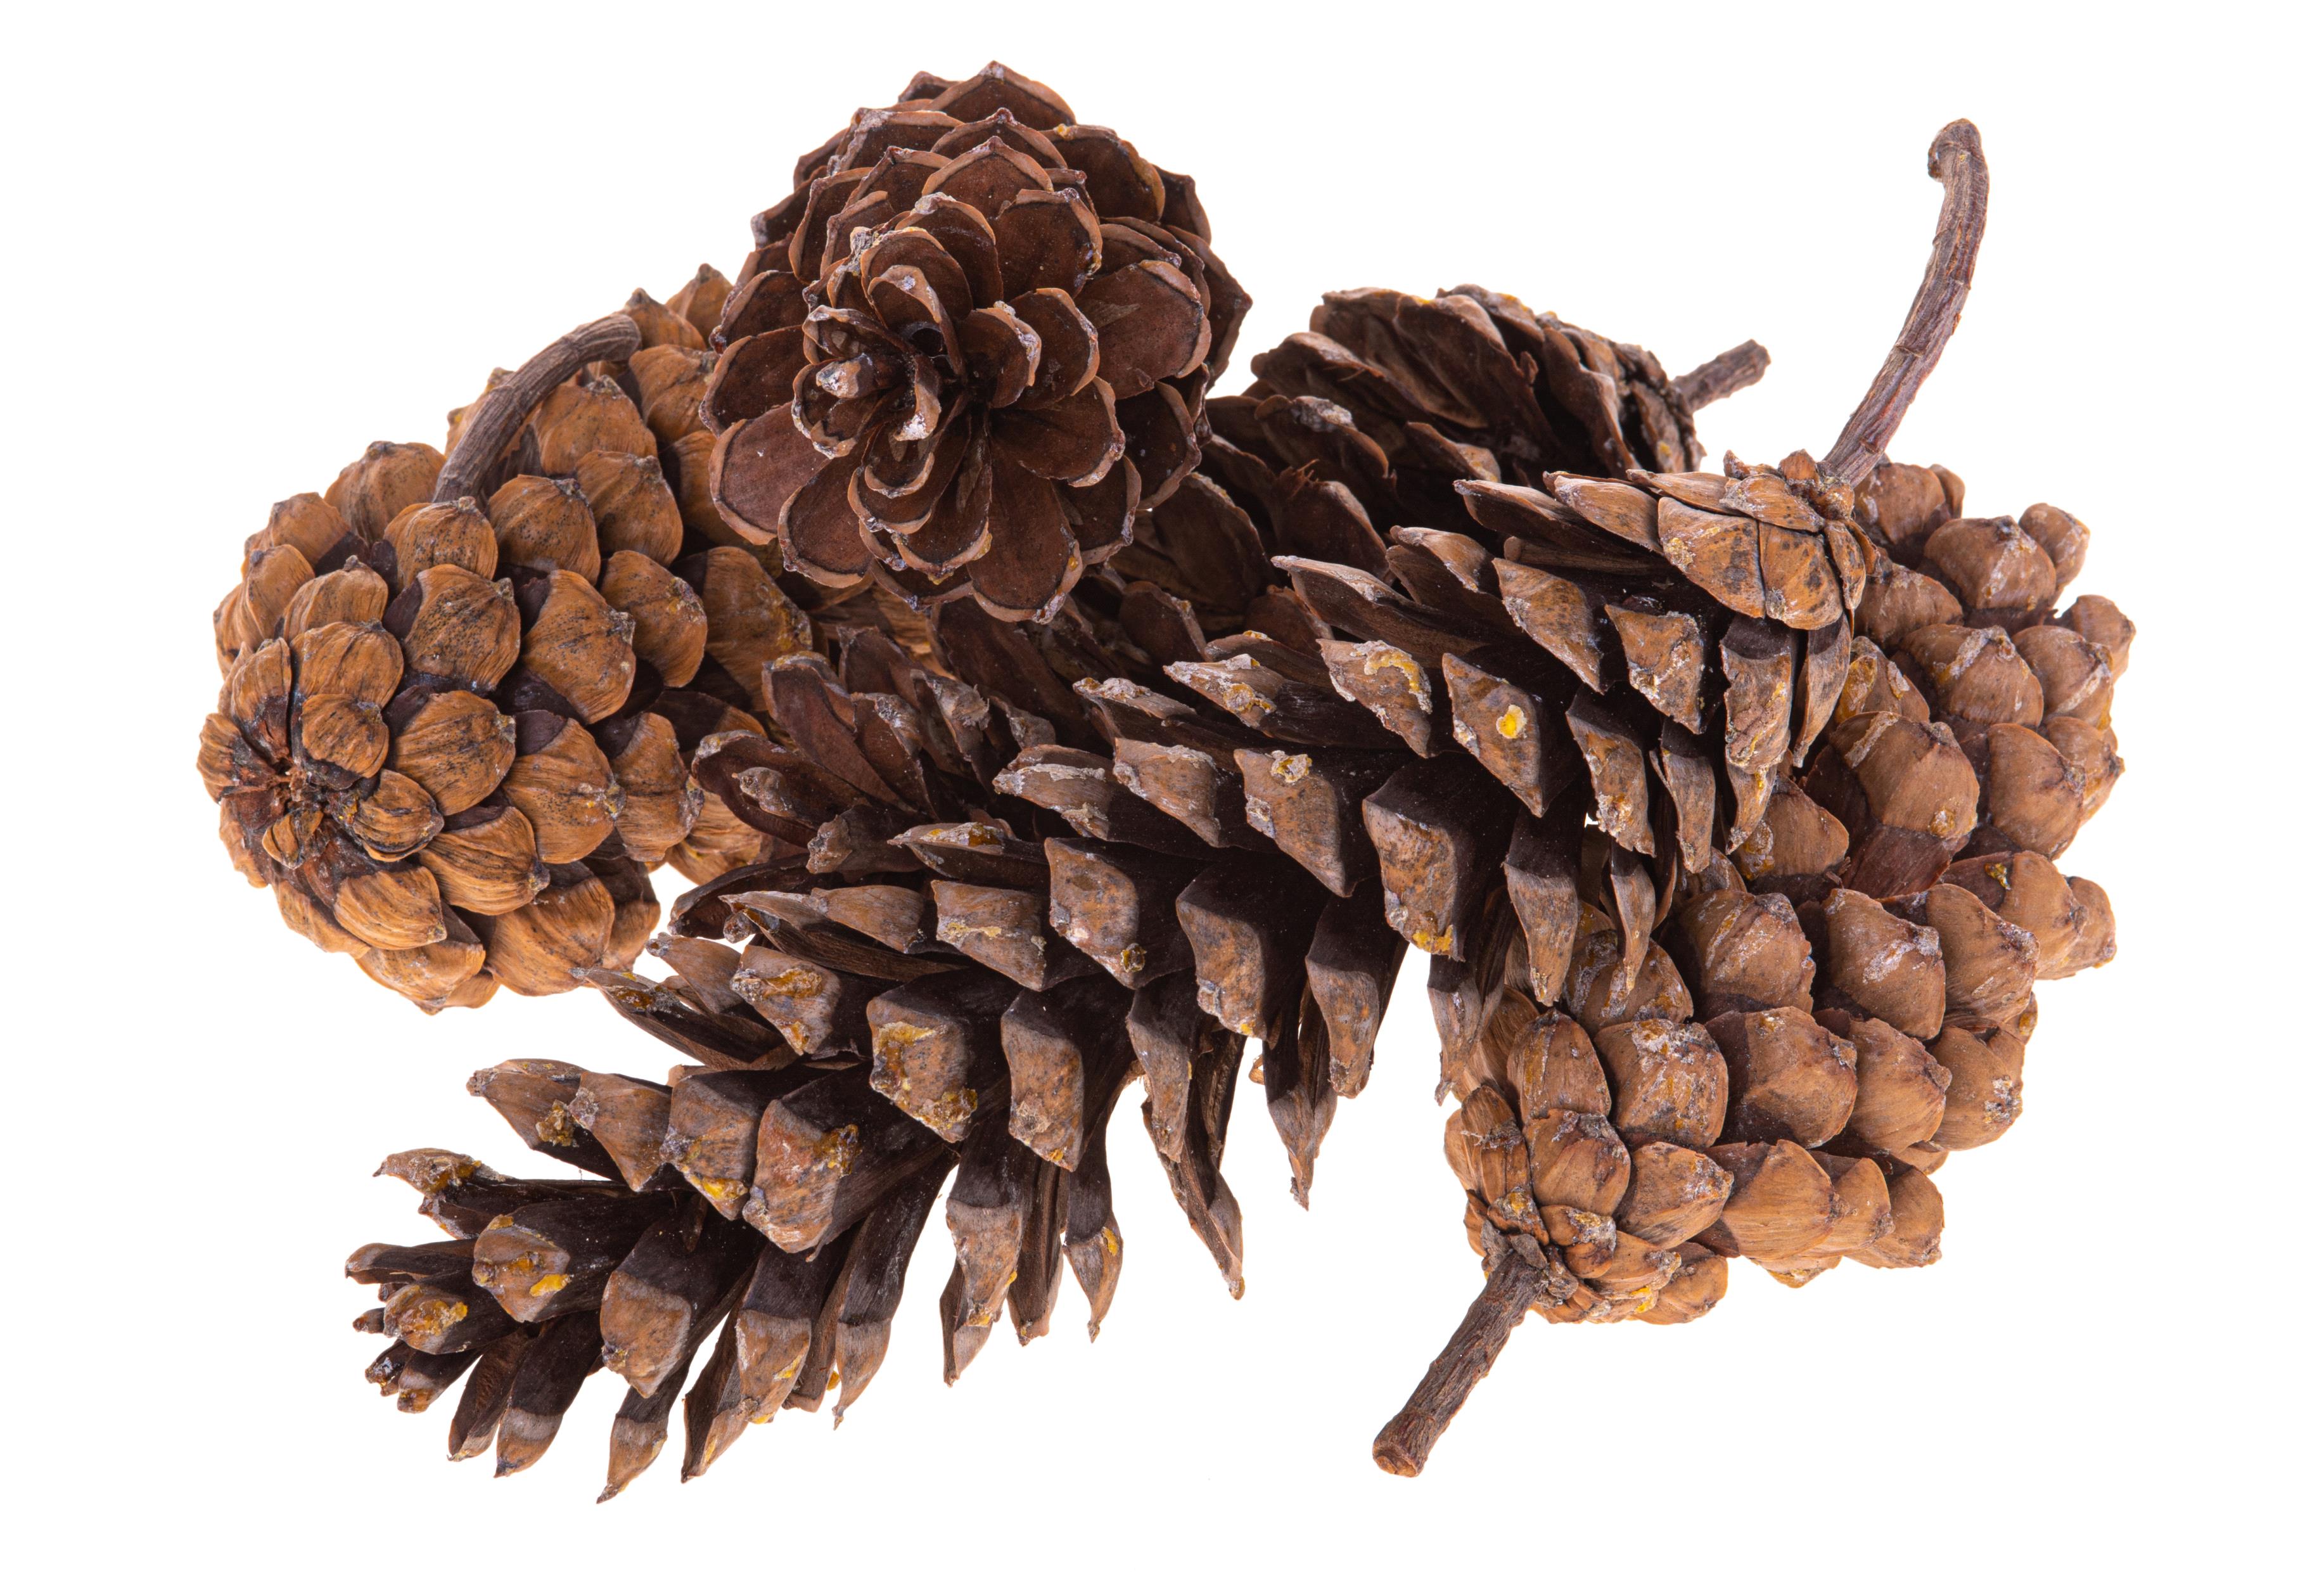 NATURAL PRODUCTS DRIED FLOWERS AND ERBS, CONES, FRUITS n coco's loose, PINA LAMBERTIANA 16/20 CM CA.1 PZ RETE